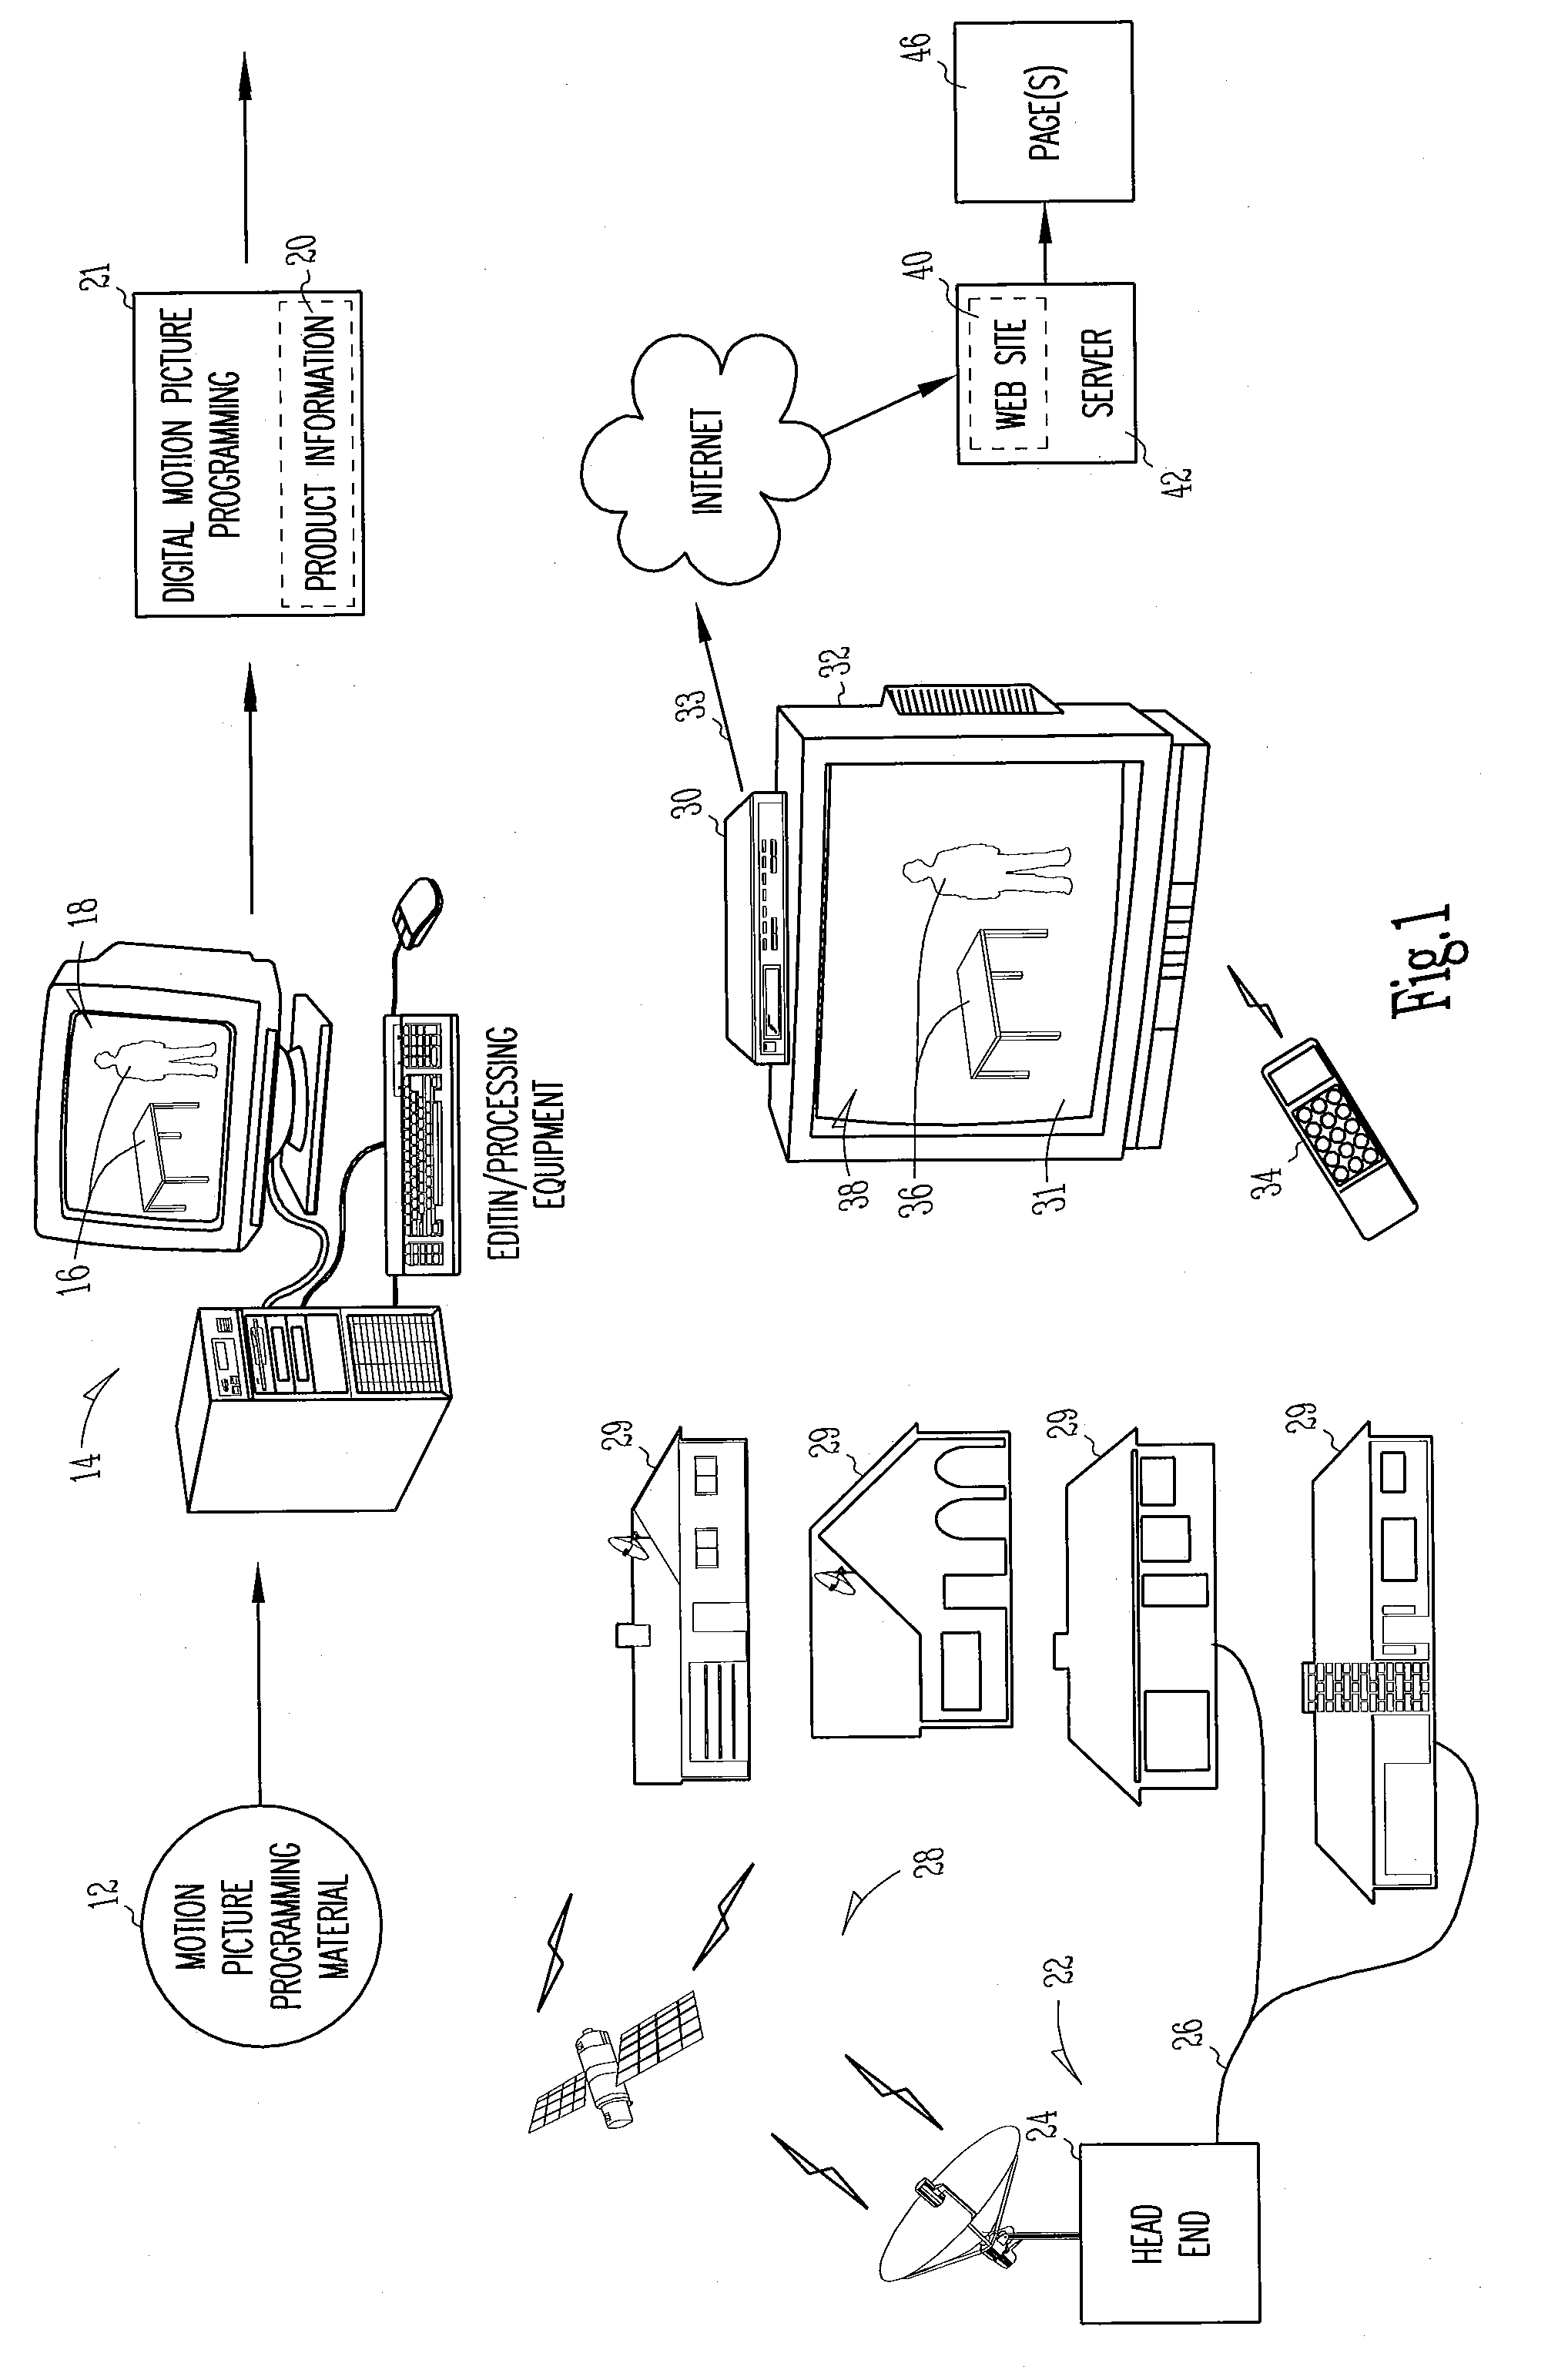 Method and apparatus for displaying information and collecting viewer information